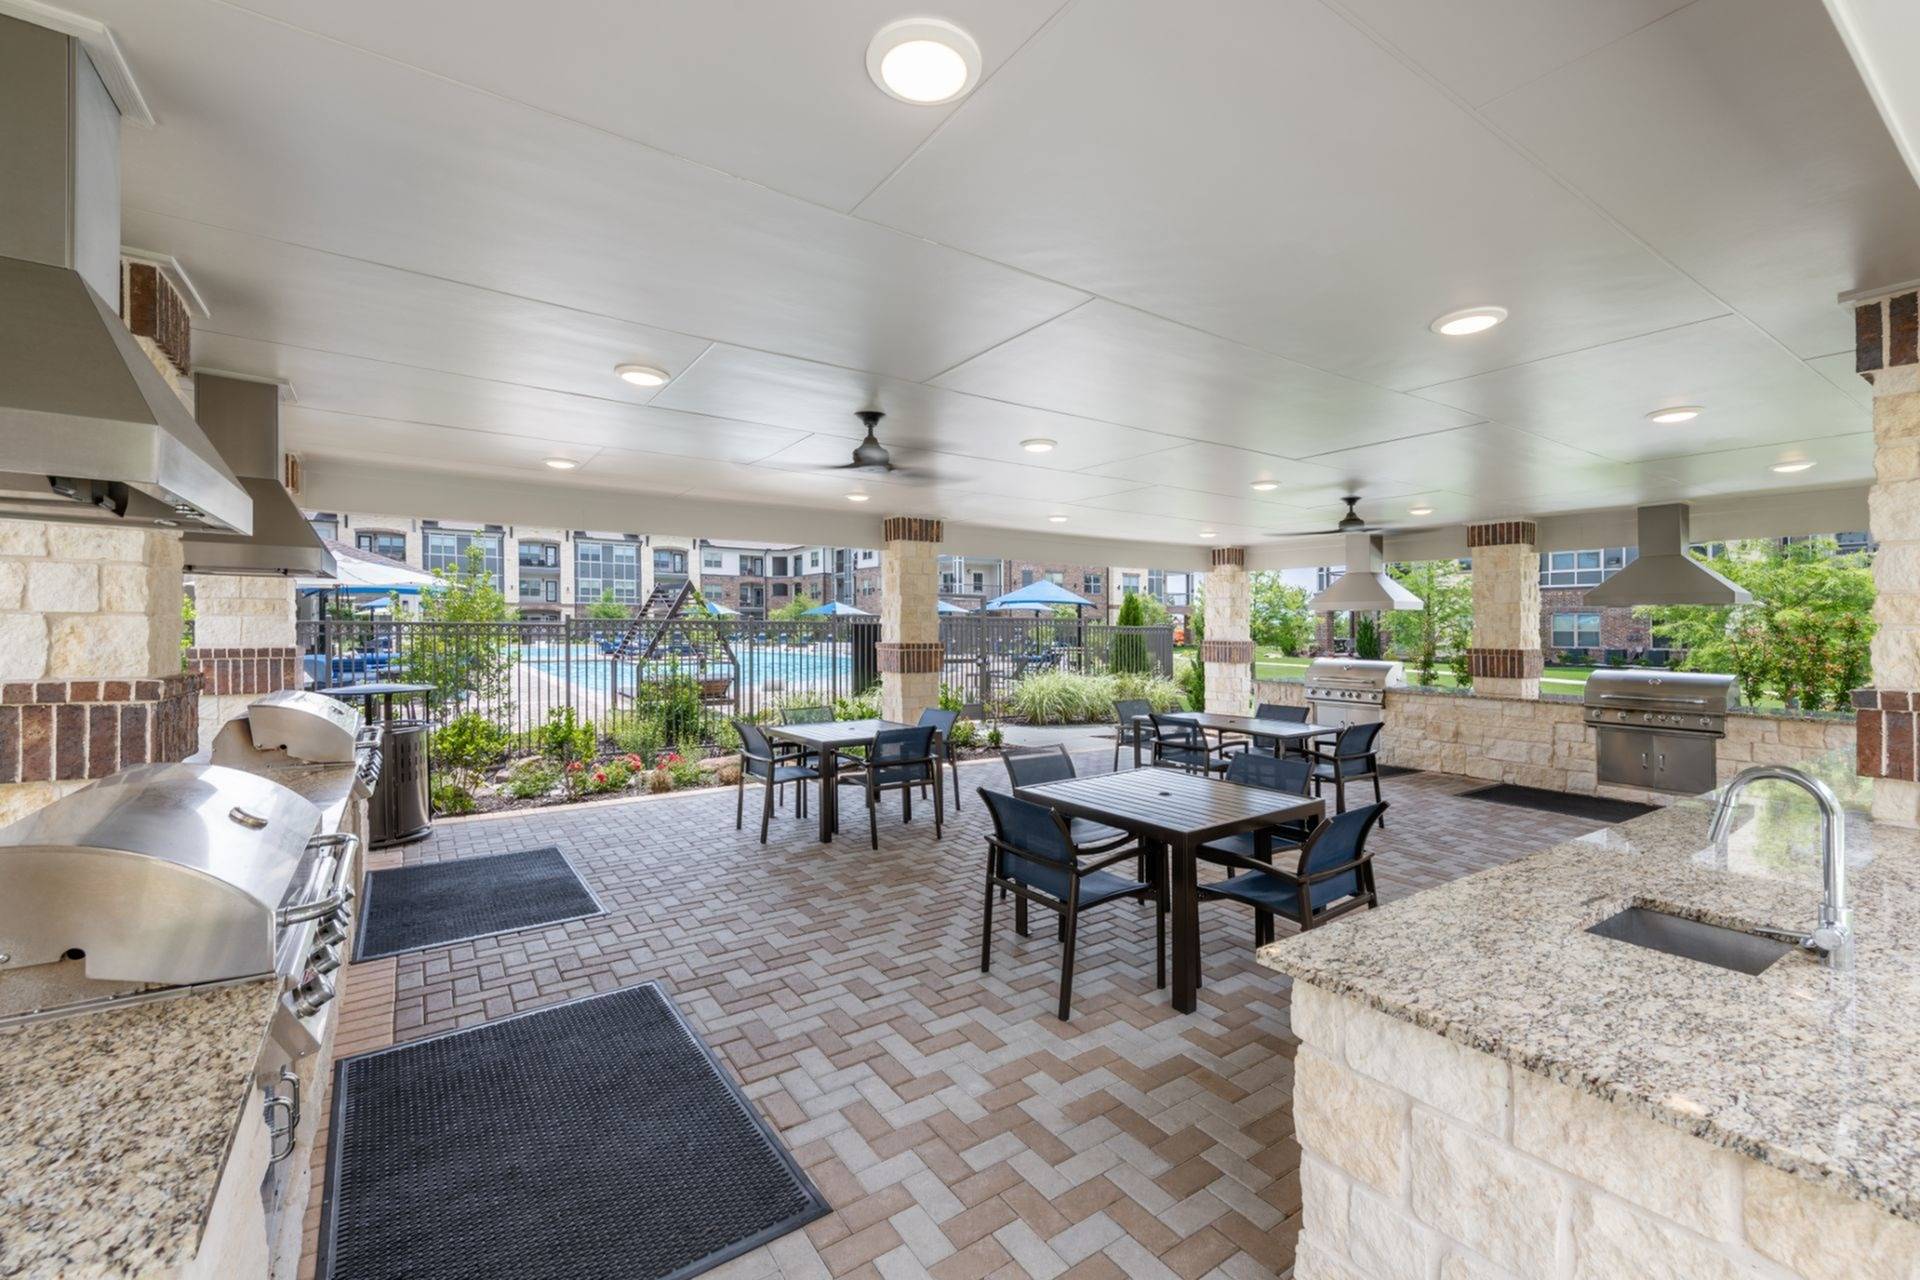 Poolside Cabana with Grills | Fort Worth TX Apartments | Alleia at Presidio